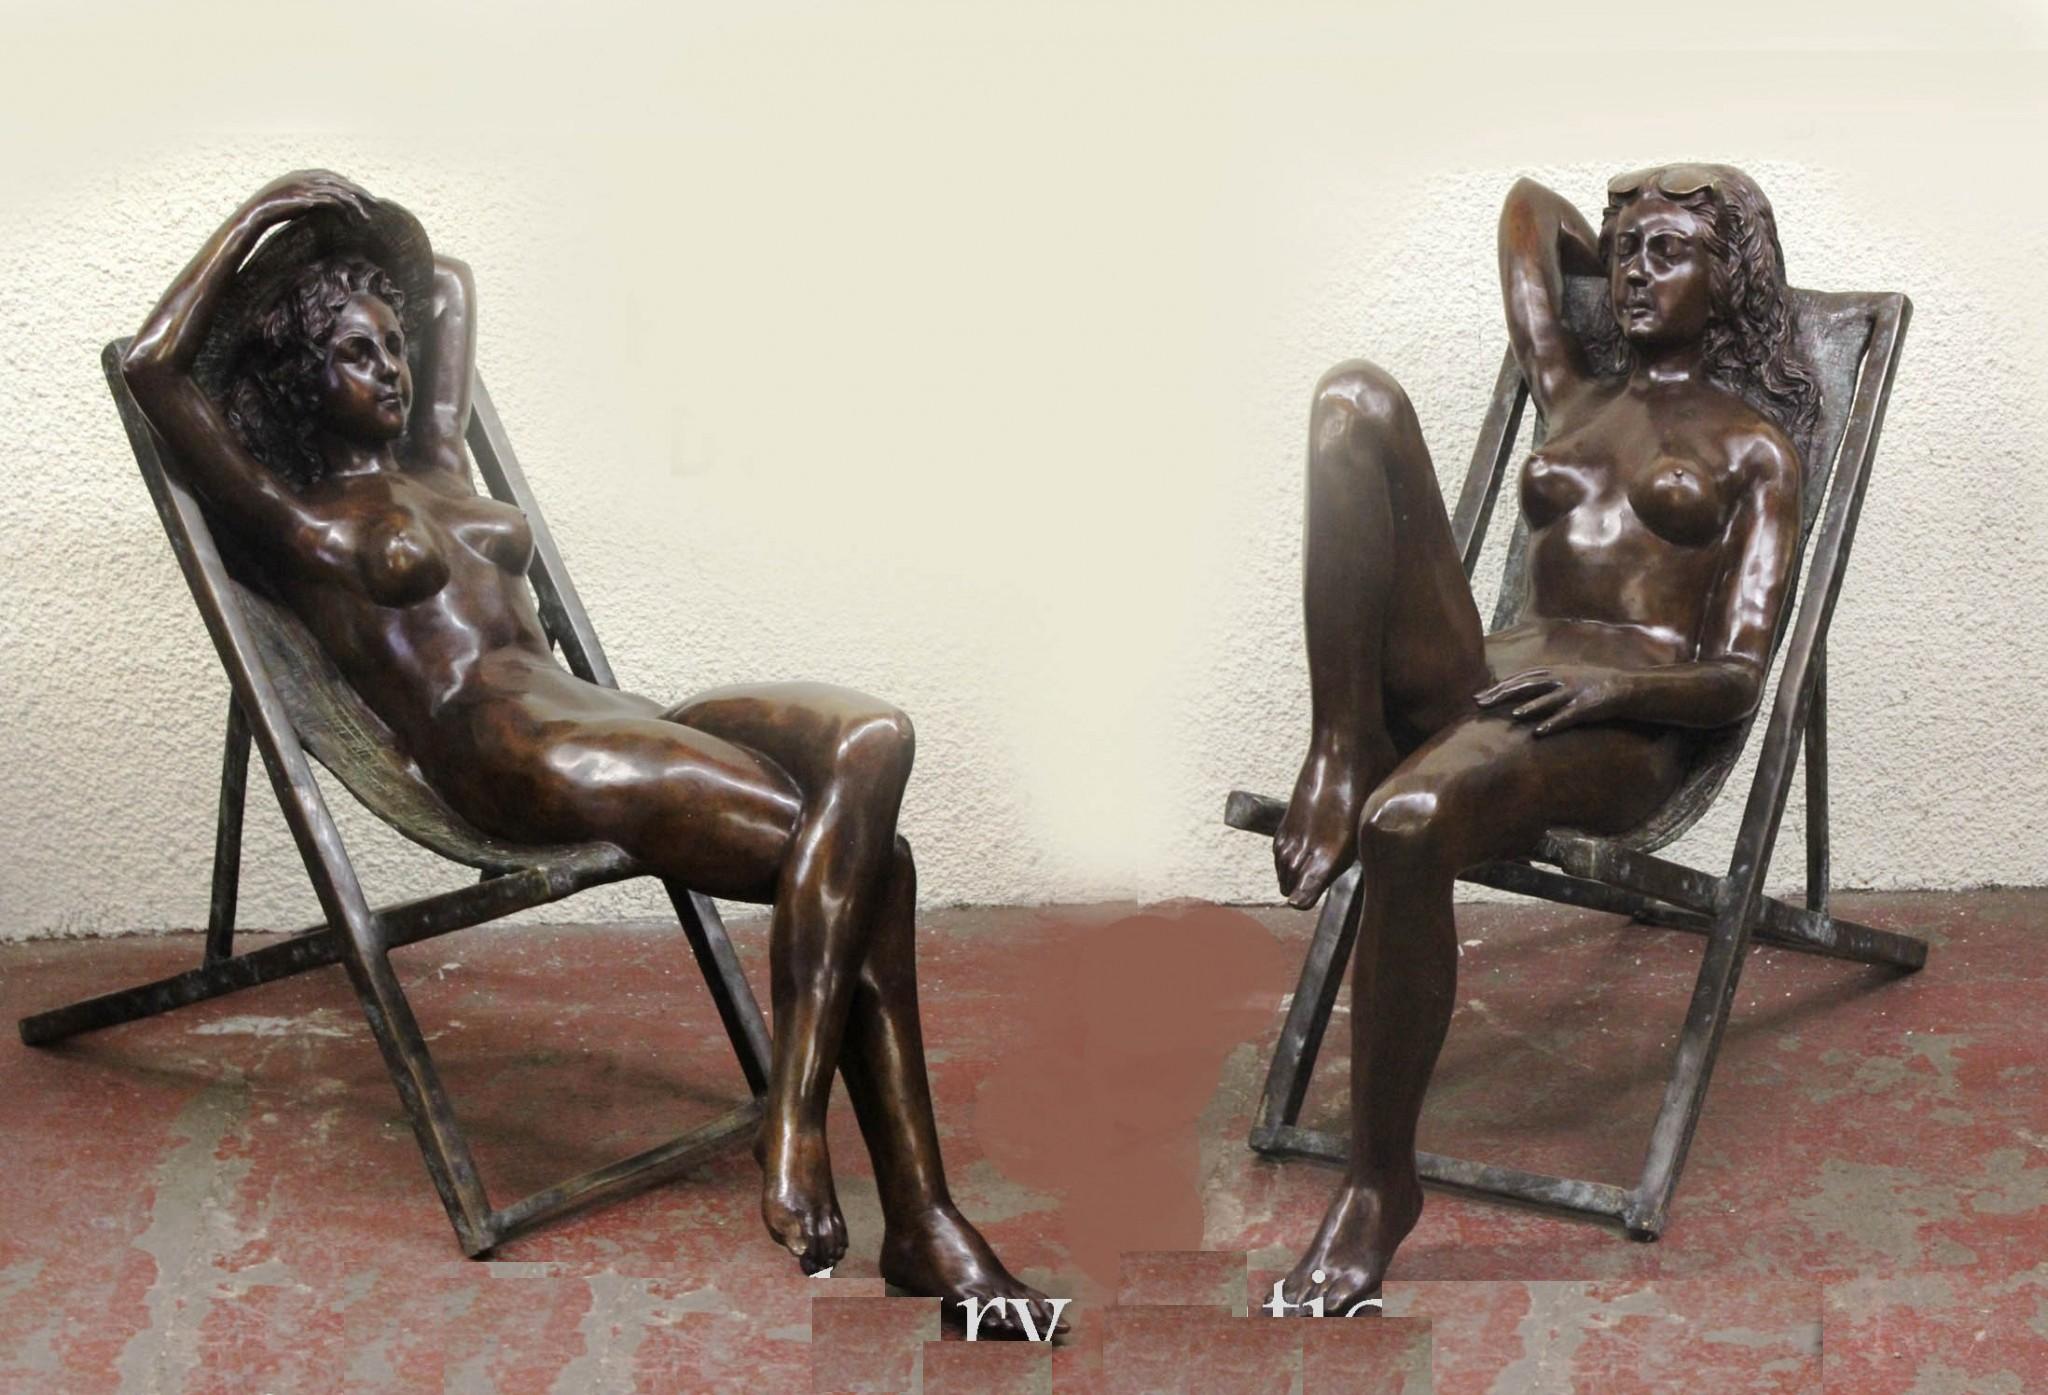 Gorgeous pair of lifesize bronze nude females reclining in deck chairs
Great for the garden and being bronze they can live outside with no fear of rusting
Quirky pair with great patina
Can be sold individually if required, please let us know
Note if